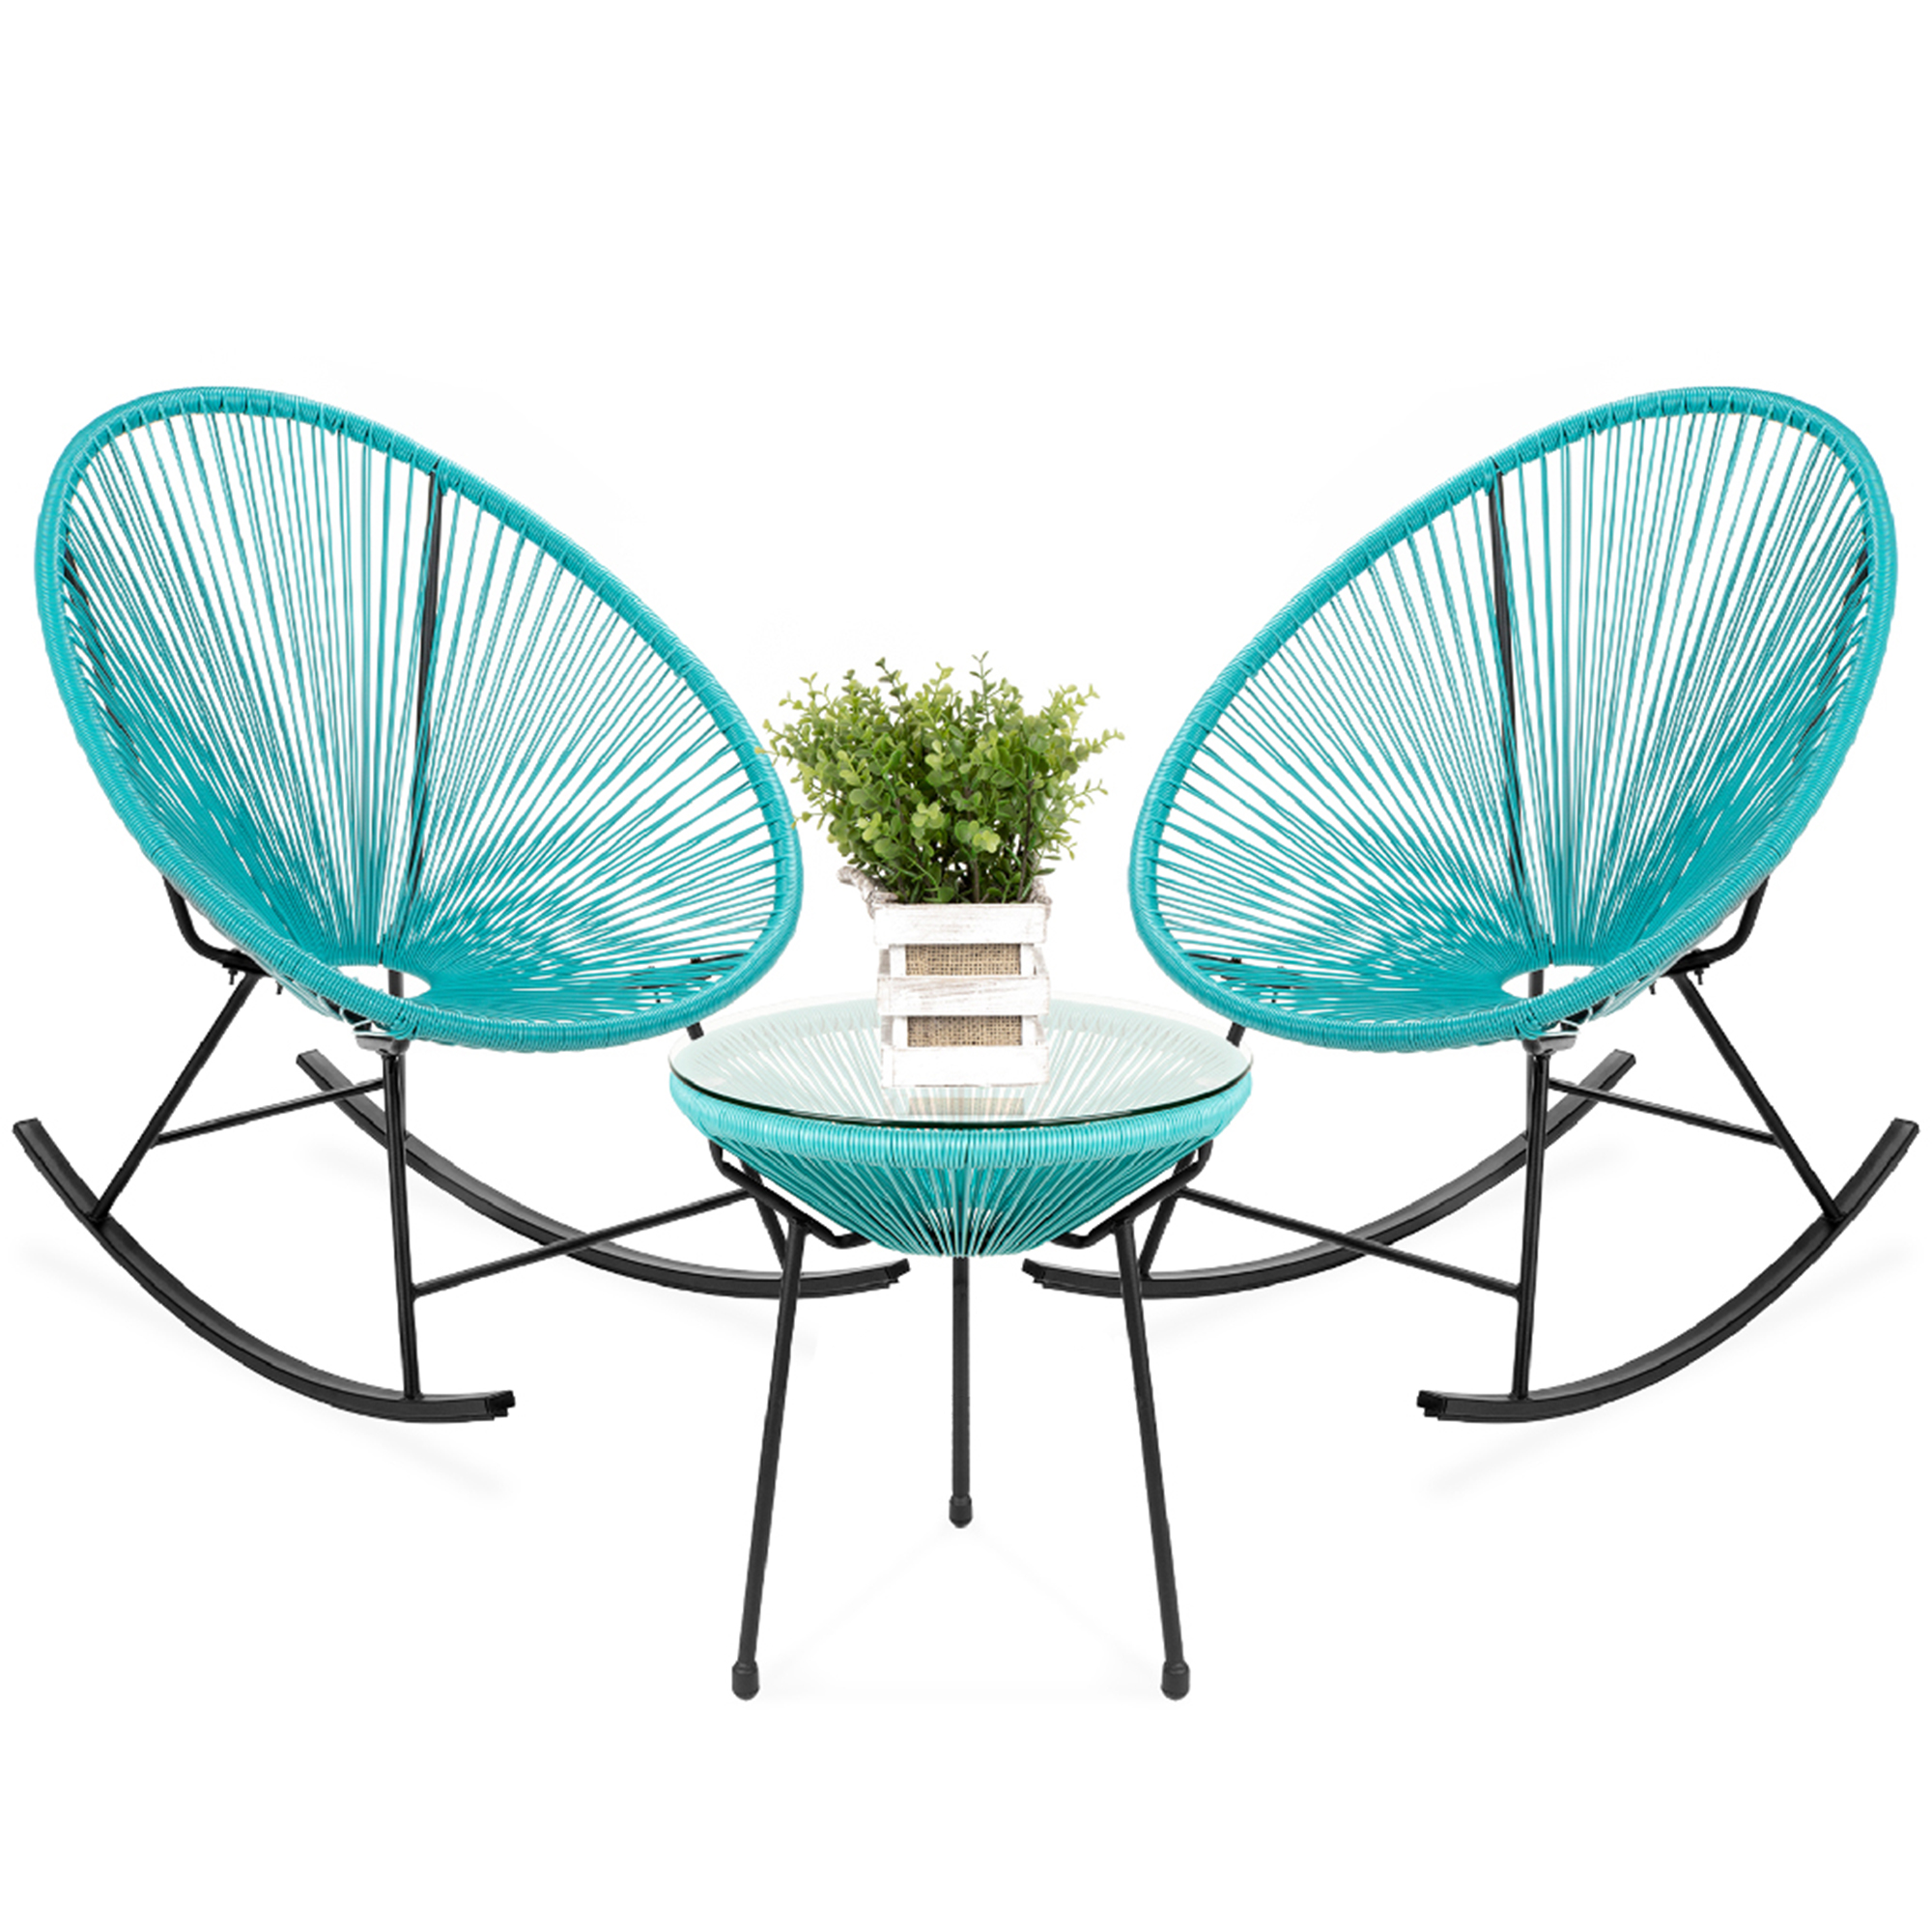 Best Choice Products 3-Piece All-Weather Patio Woven Rope Acapulco Bistro Furniture Set w/ Rocking Chairs, Table - Blue - image 1 of 7